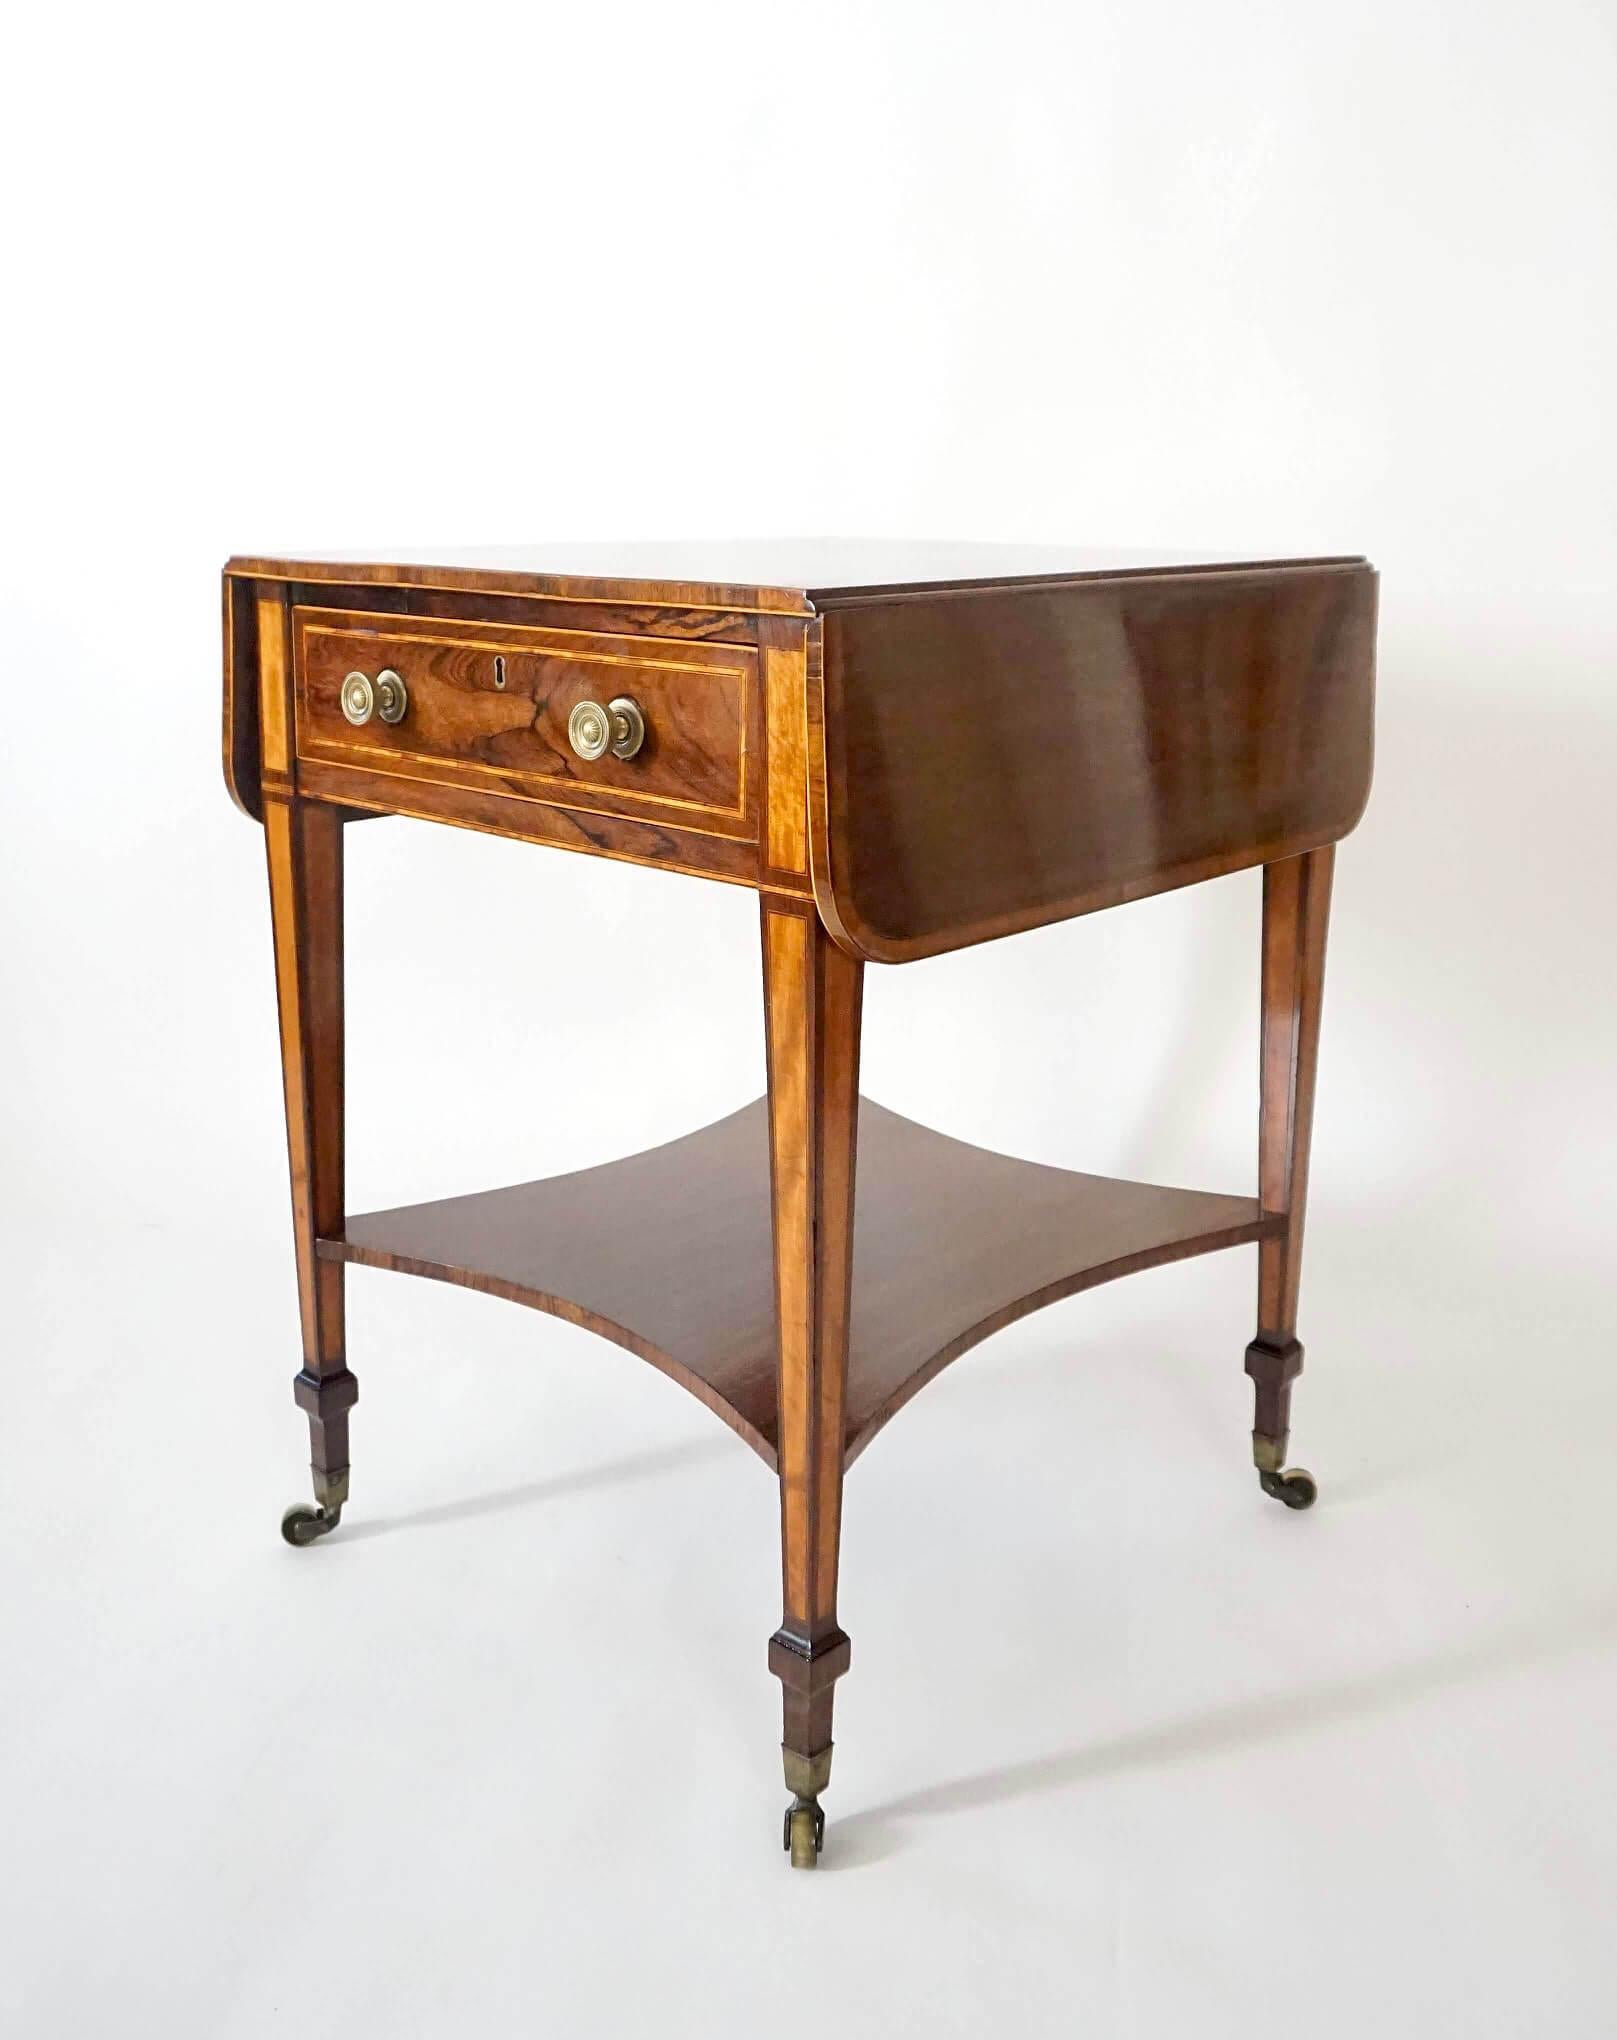 Hand-Crafted English George III Sheraton Rosewood & Satinwood Pembroke Table, circa 1800 For Sale